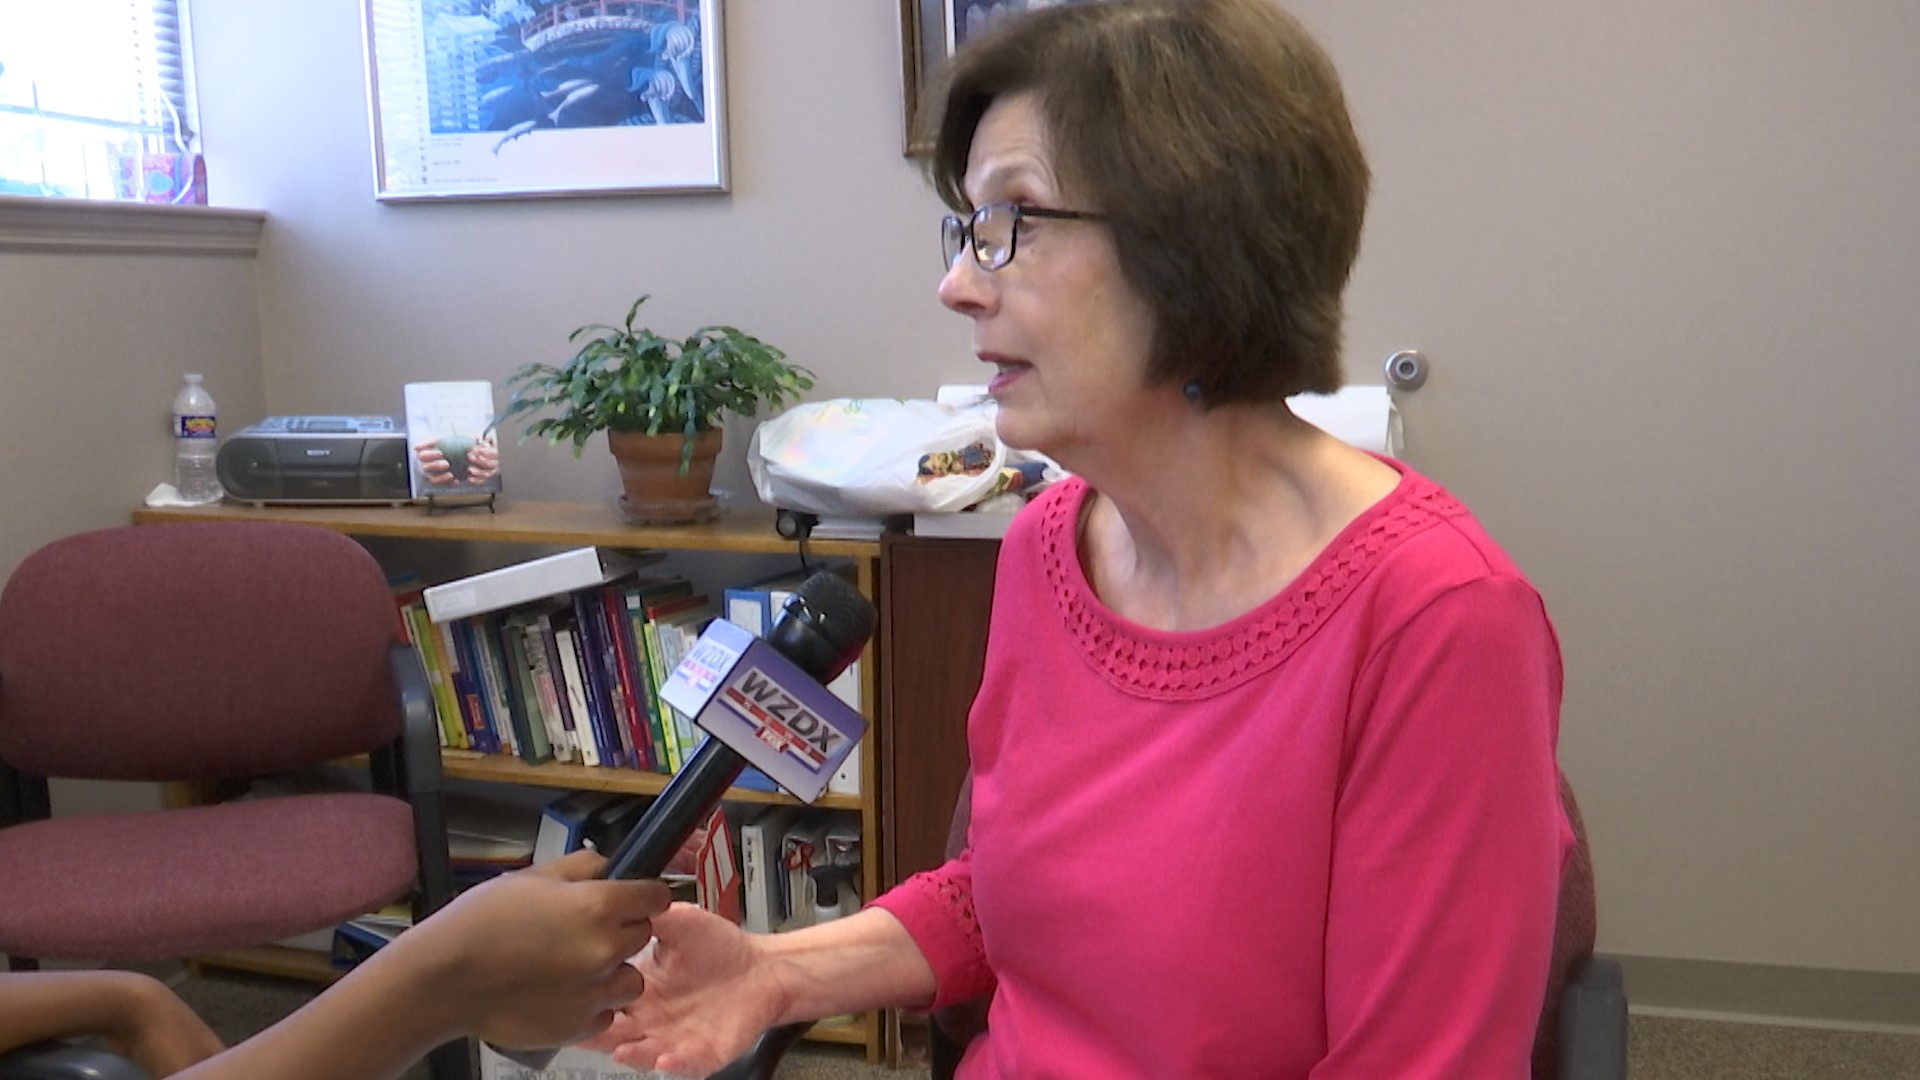 We met up with Ann Anderson, Executive Director of CASA of Madison County, a care service for elderly and homebound citizens in the area. She shared some information on how older adults can protect their information online and over the phone against scammers.